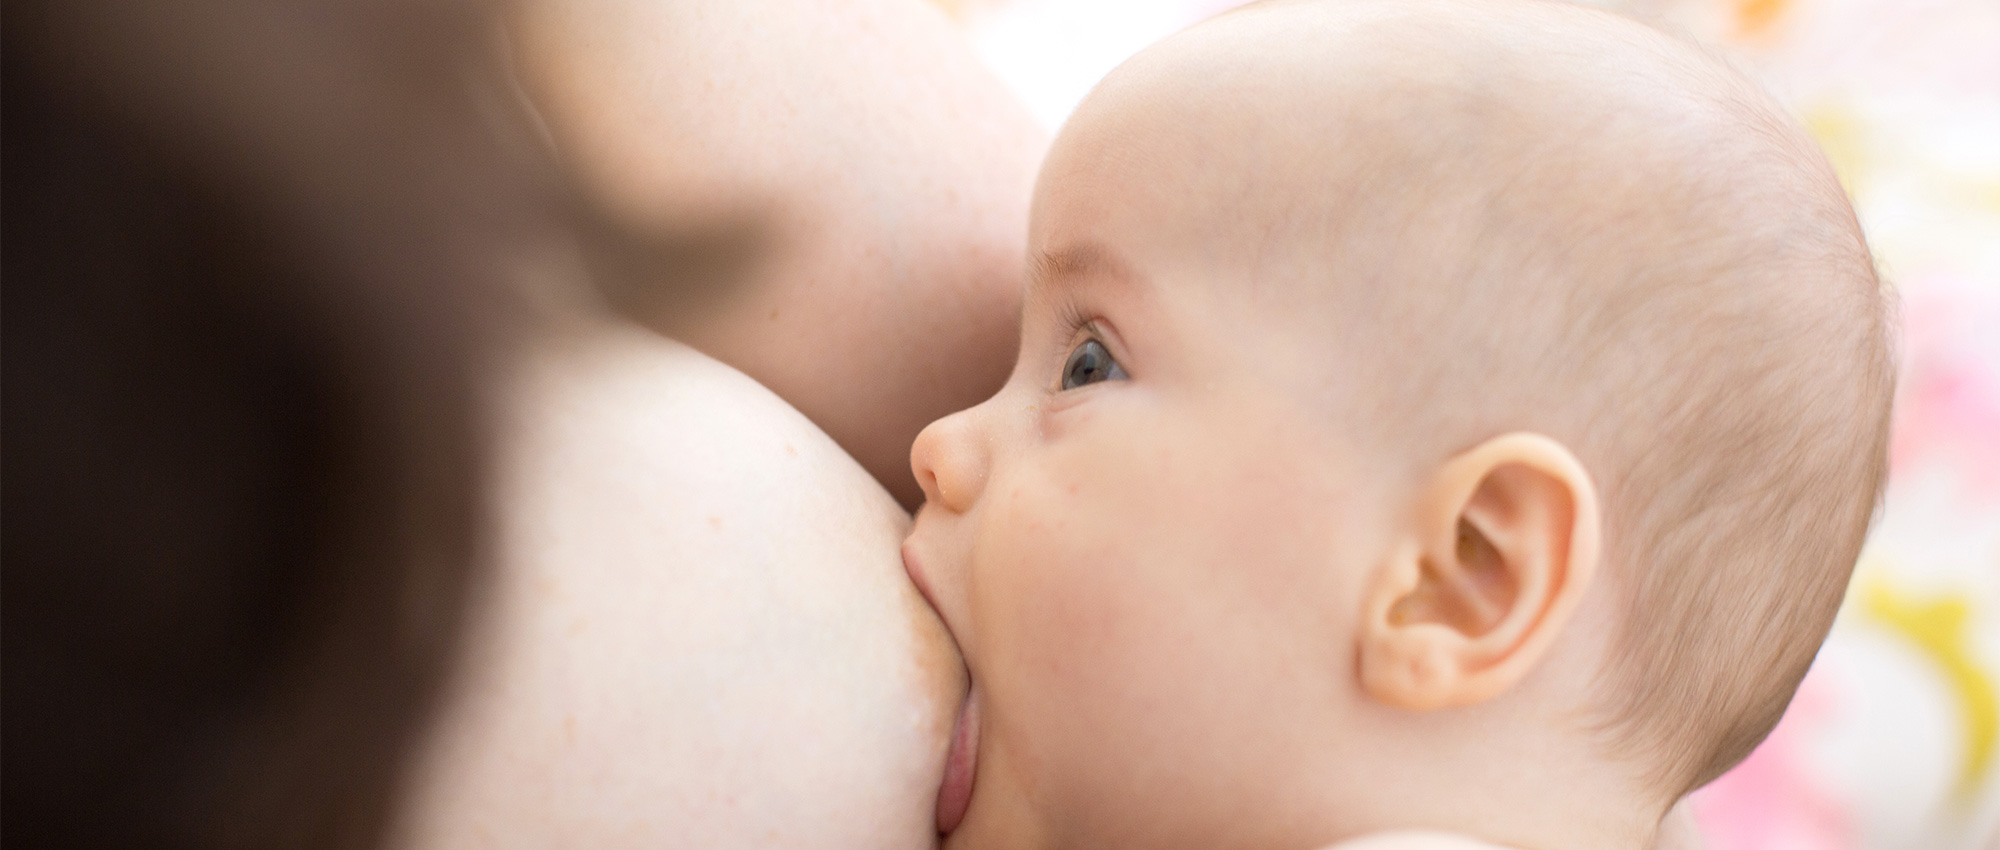 Positive Breastfeeding and Early Parenting Preparation Workshop